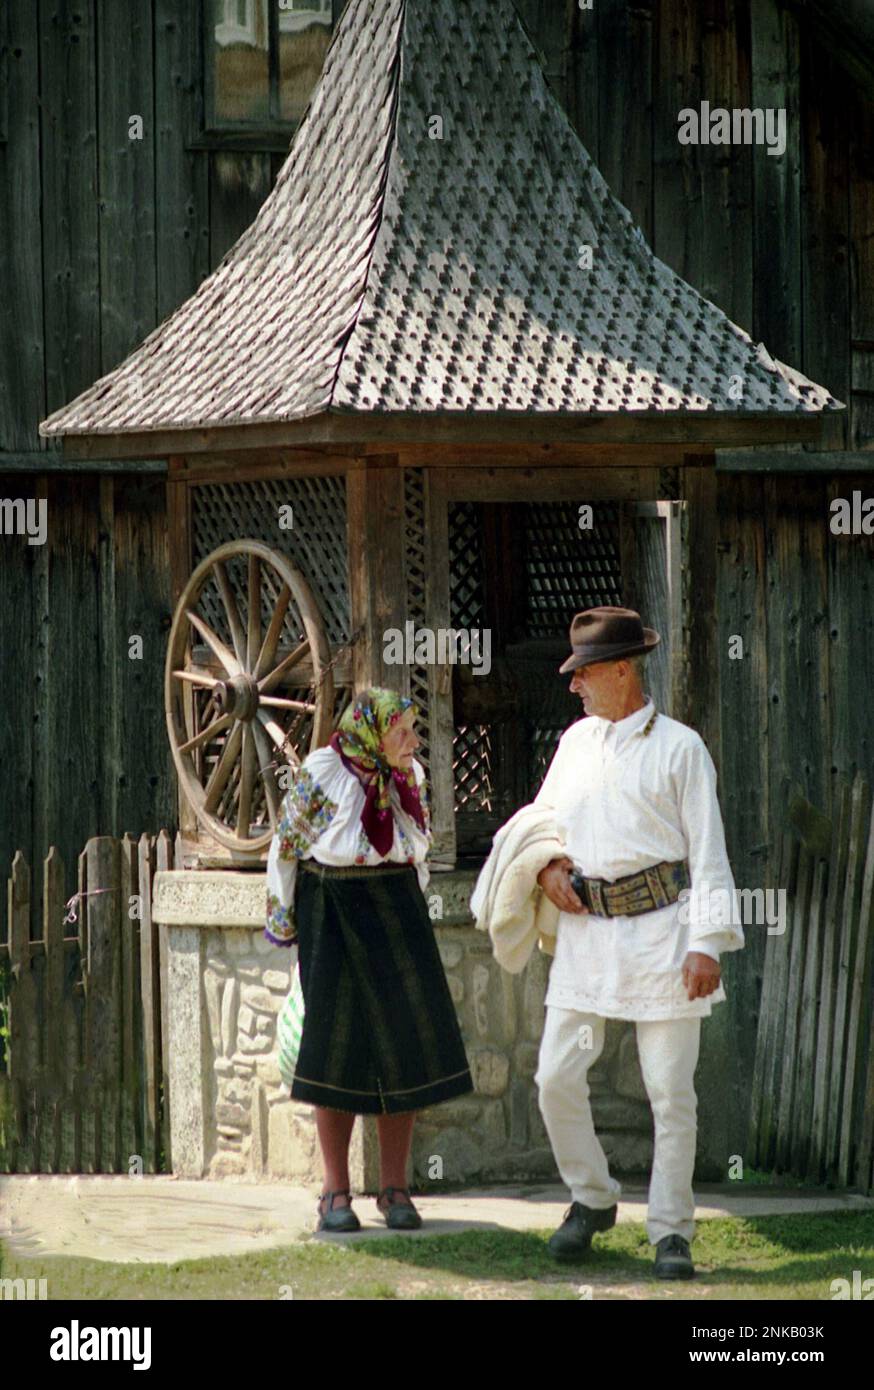 Straja, Suceava County, Romania, 1998. Elderly couple wearing traditional garments near a water well with wheel and wooden shingle roof. Stock Photo